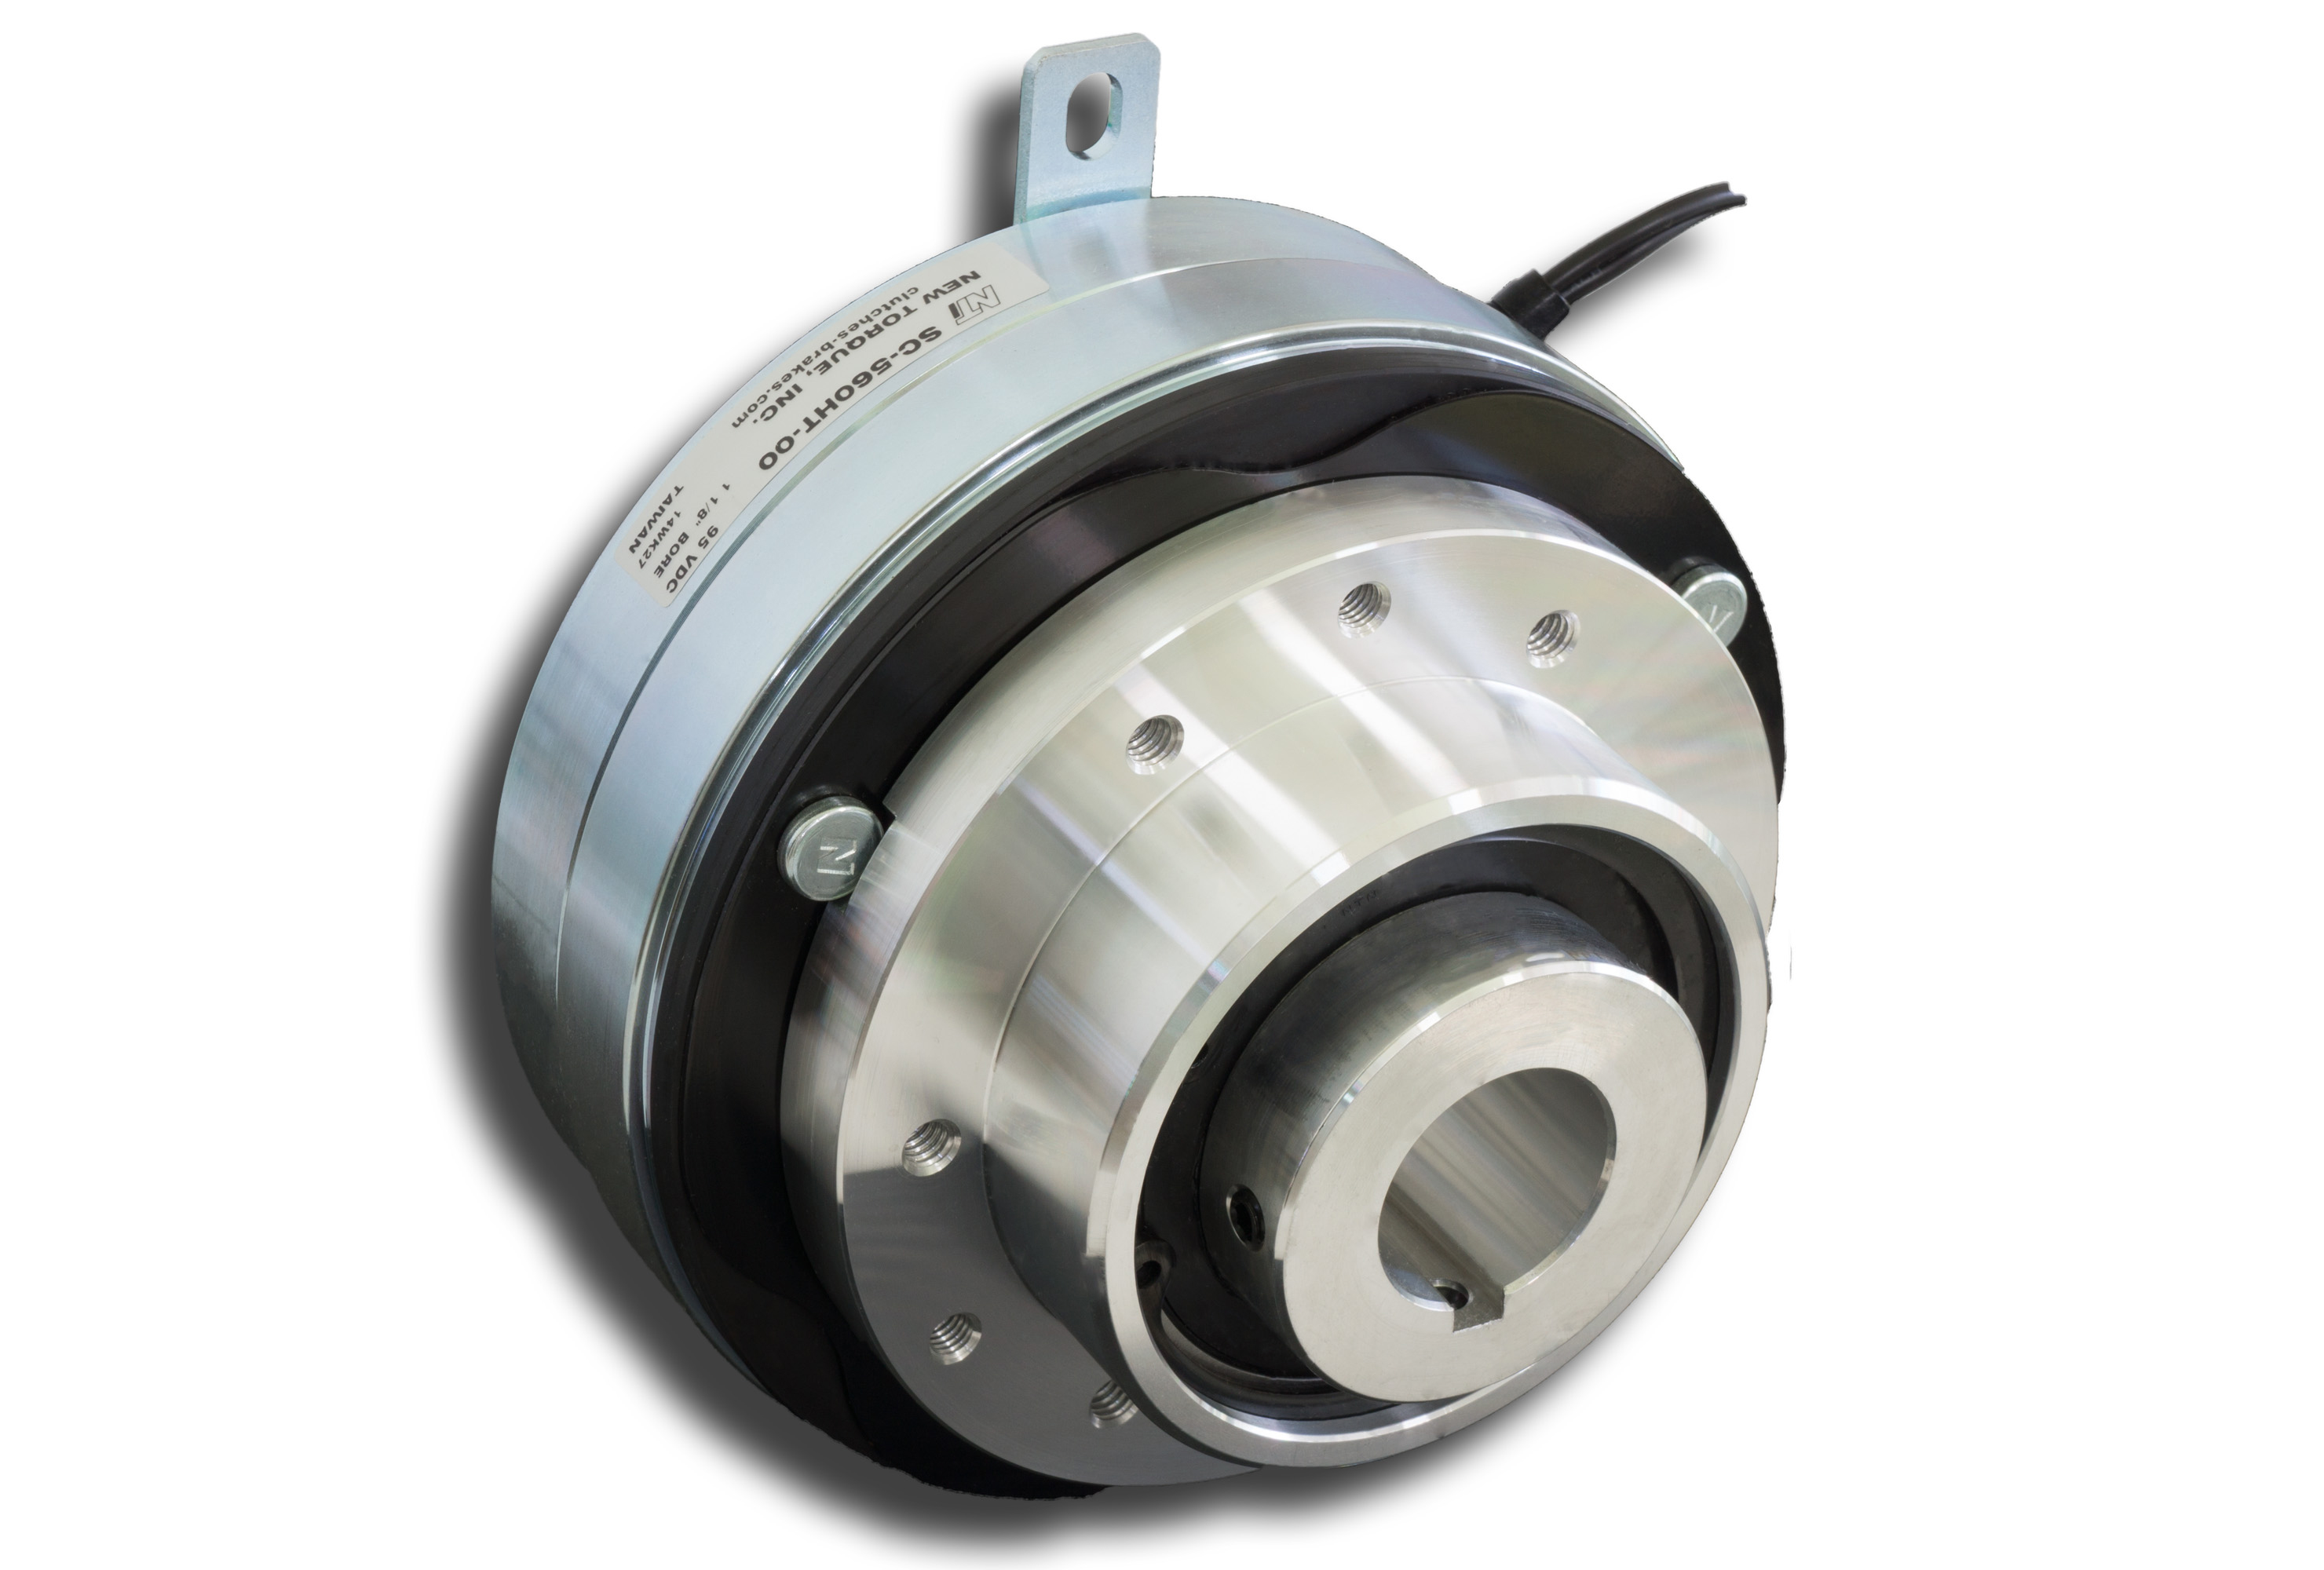 These shaft-mounted electric clutches from New Torque have a static torque rating from 15 to 202 Nm, voltage of 24 to95 Vdc, and power of 16 to 50 W.